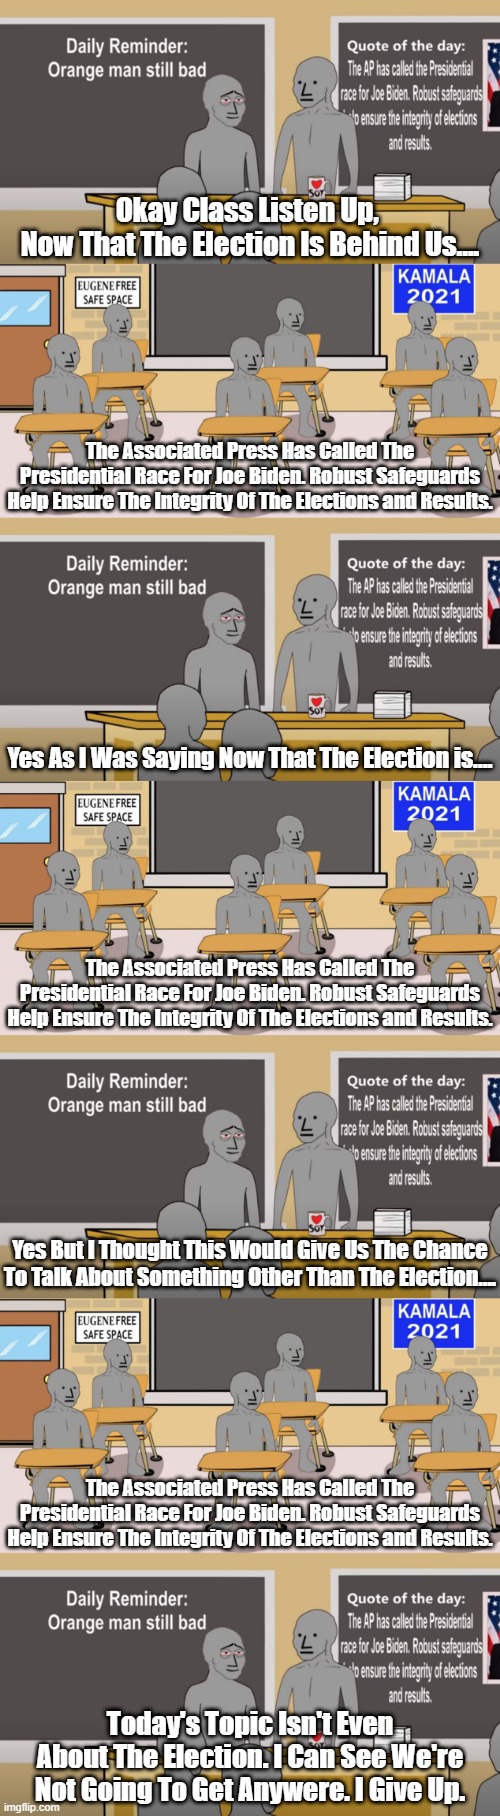 WHY DO THE NPC'S AND NPC SHILLS ON HERE CRY SO LOUDLY ABOUT THERE BEING NO ELECTION FRAUD? ARE THEY SCARED LITTLE GASLIGHTERS? | Okay Class Listen Up, 
Now That The Election Is Behind Us.... The Associated Press Has Called The Presidential Race For Joe Biden. Robust Safeguards Help Ensure The Integrity Of The Elections and Results. Yes As I Was Saying Now That The Election is.... The Associated Press Has Called The Presidential Race For Joe Biden. Robust Safeguards Help Ensure The Integrity Of The Elections and Results. Yes But I Thought This Would Give Us The Chance To Talk About Something Other Than The Election.... The Associated Press Has Called The Presidential Race For Joe Biden. Robust Safeguards Help Ensure The Integrity Of The Elections and Results. Today's Topic Isn't Even About The Election. I Can See We're Not Going To Get Anywere. I Give Up. | image tagged in me me meme,npc shills,the demented dozen,scared little boys,what will they find | made w/ Imgflip meme maker